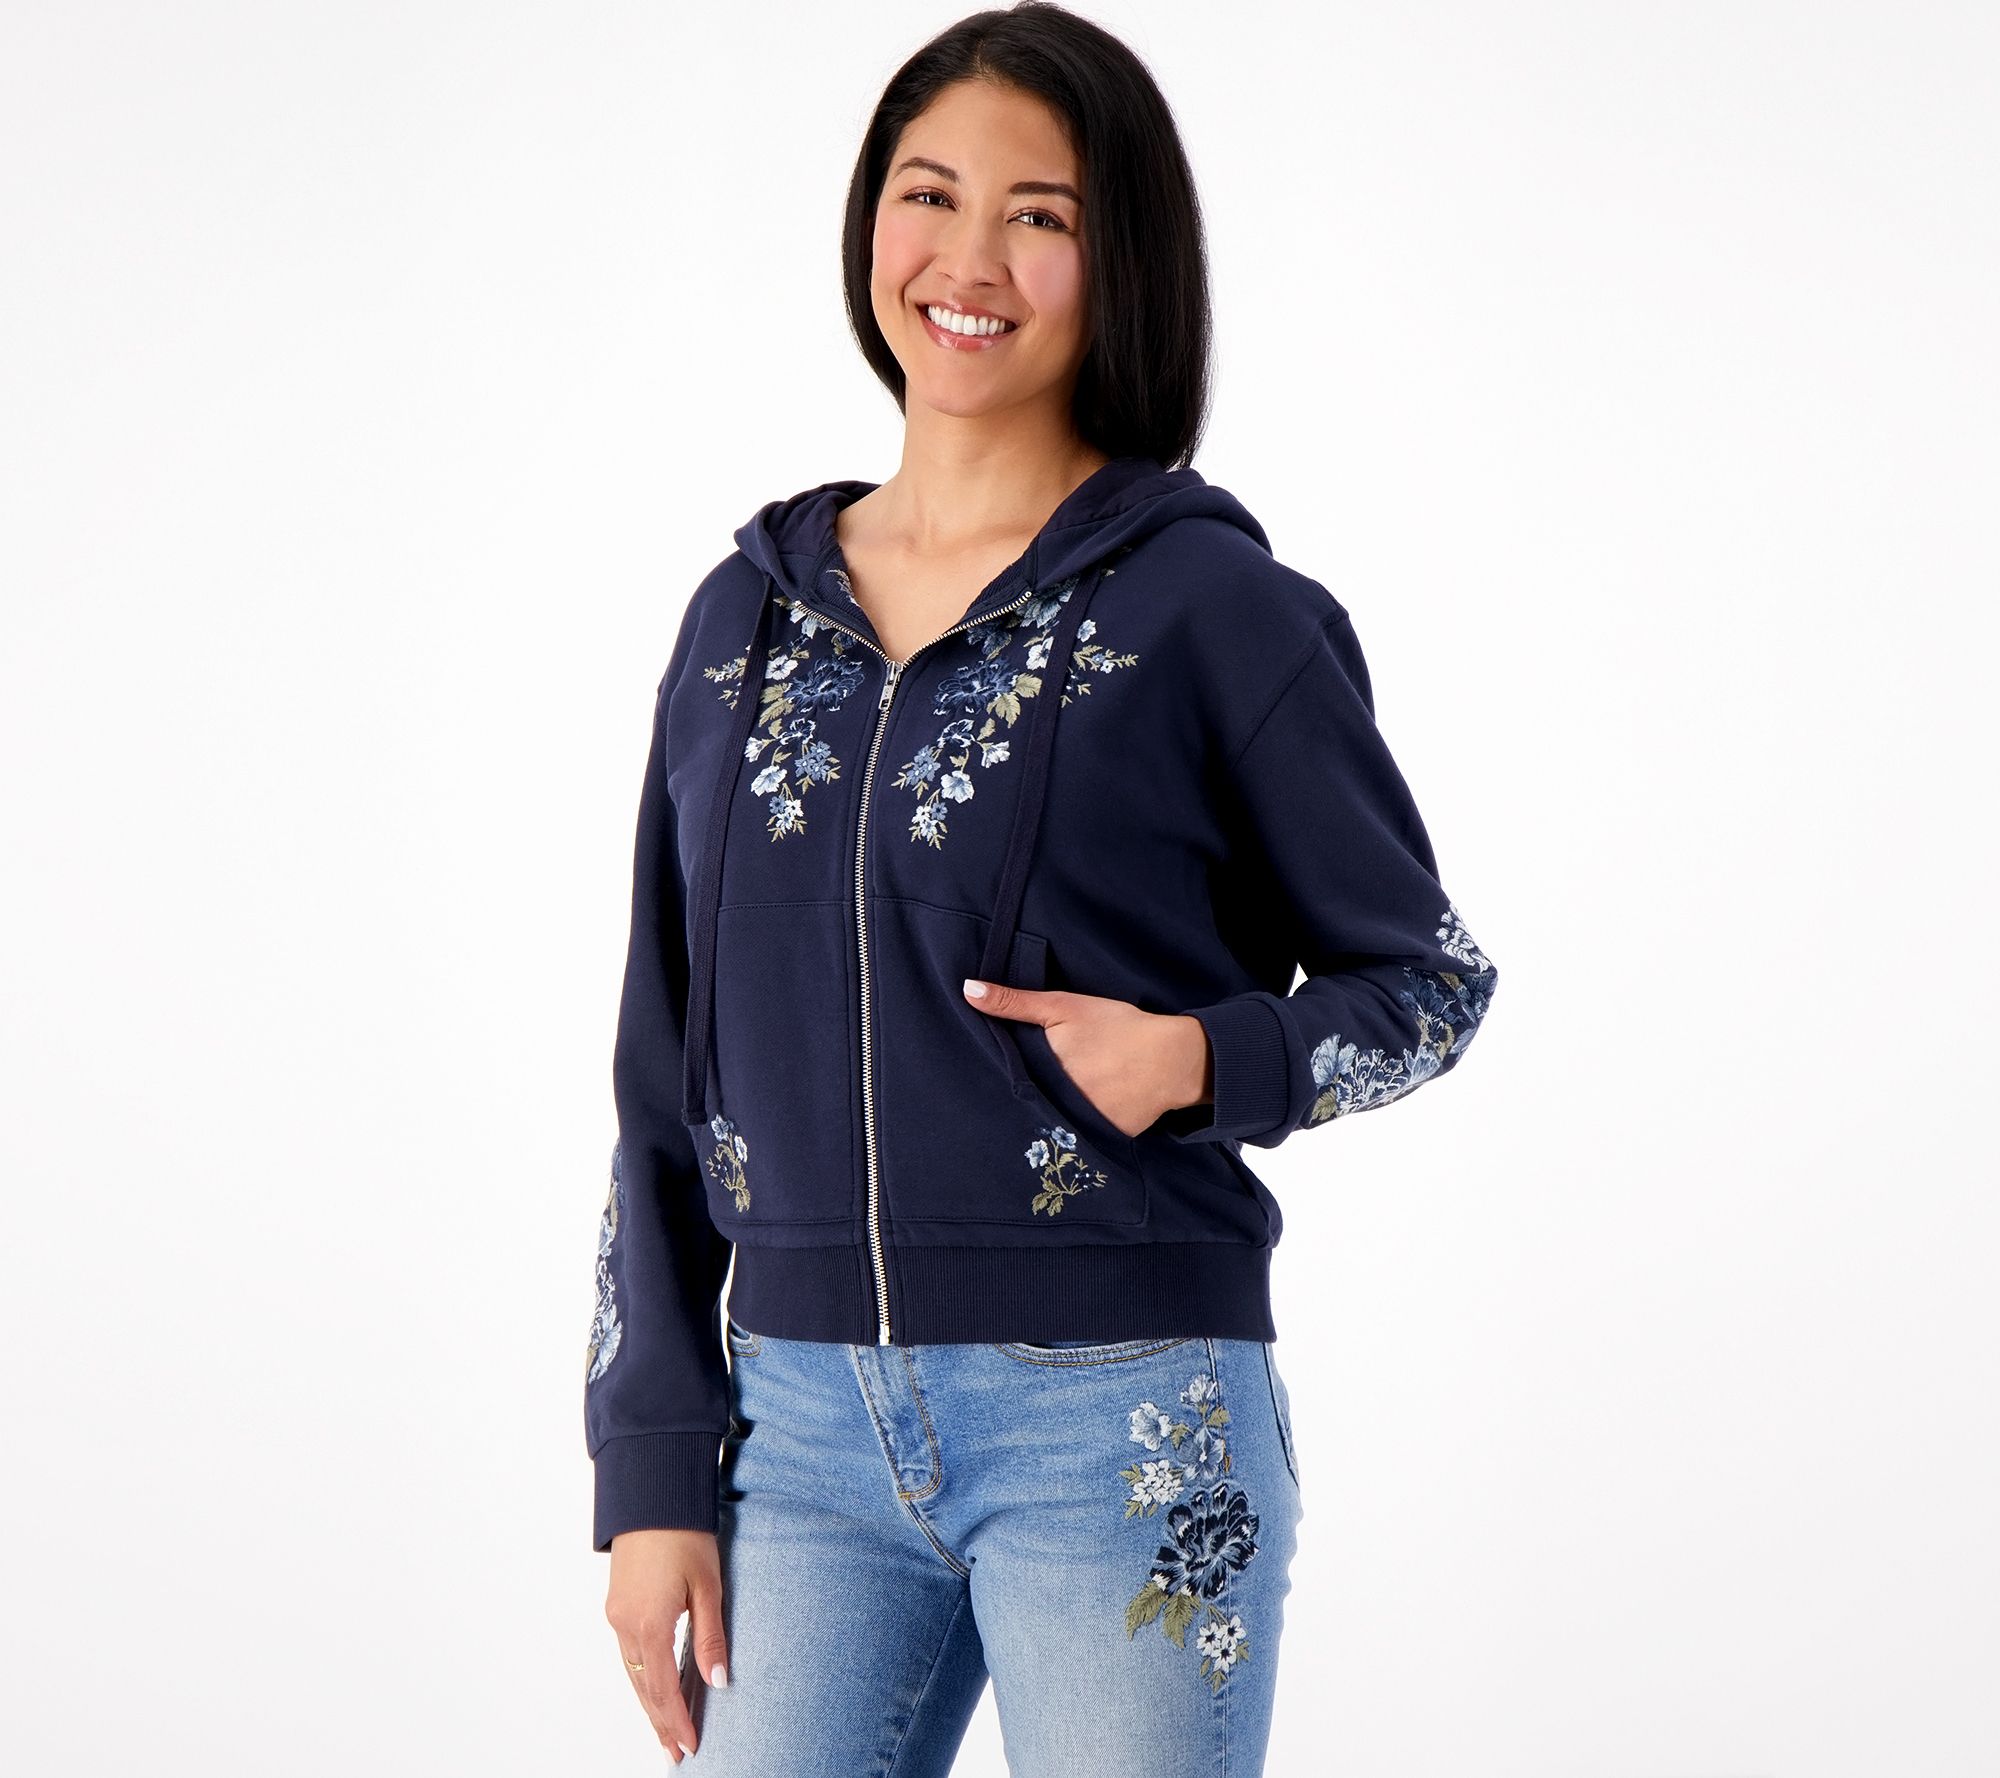 Driftwood Jeans Embroidered Zip-Up Blue Bell Hoodie- Fleur